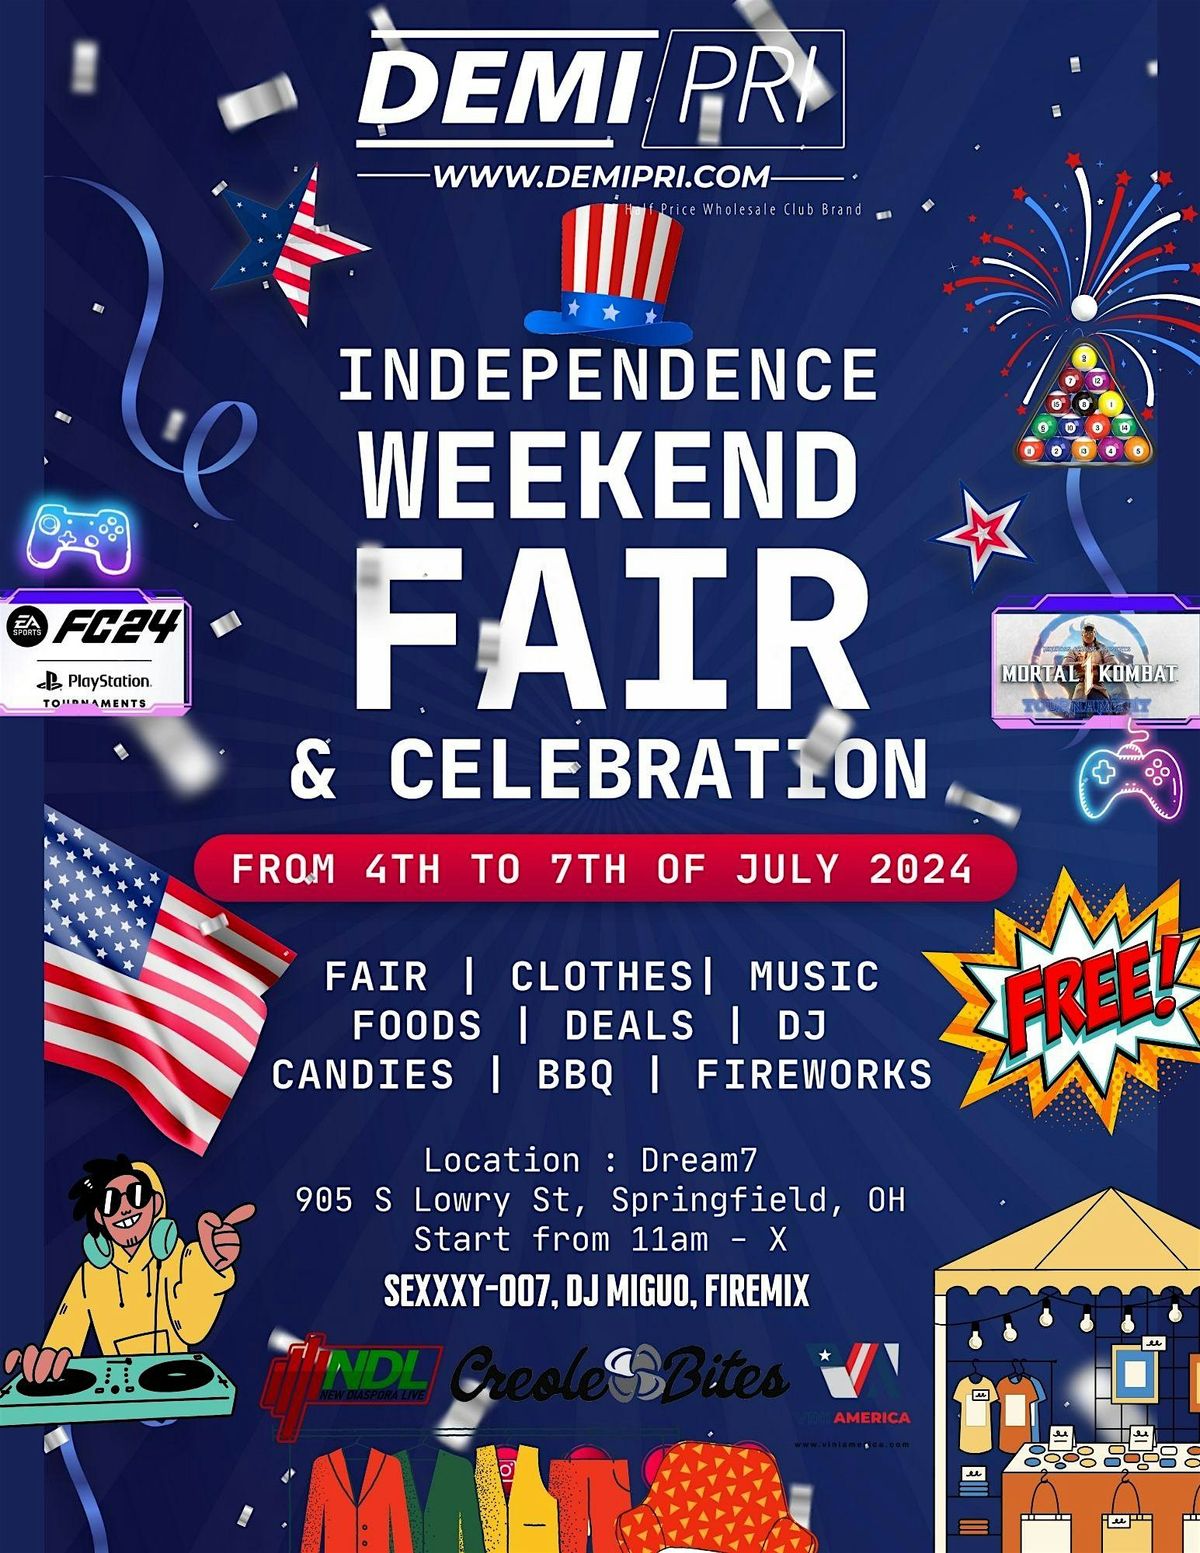 Springfield's Independence Weekend Fair and Celebration